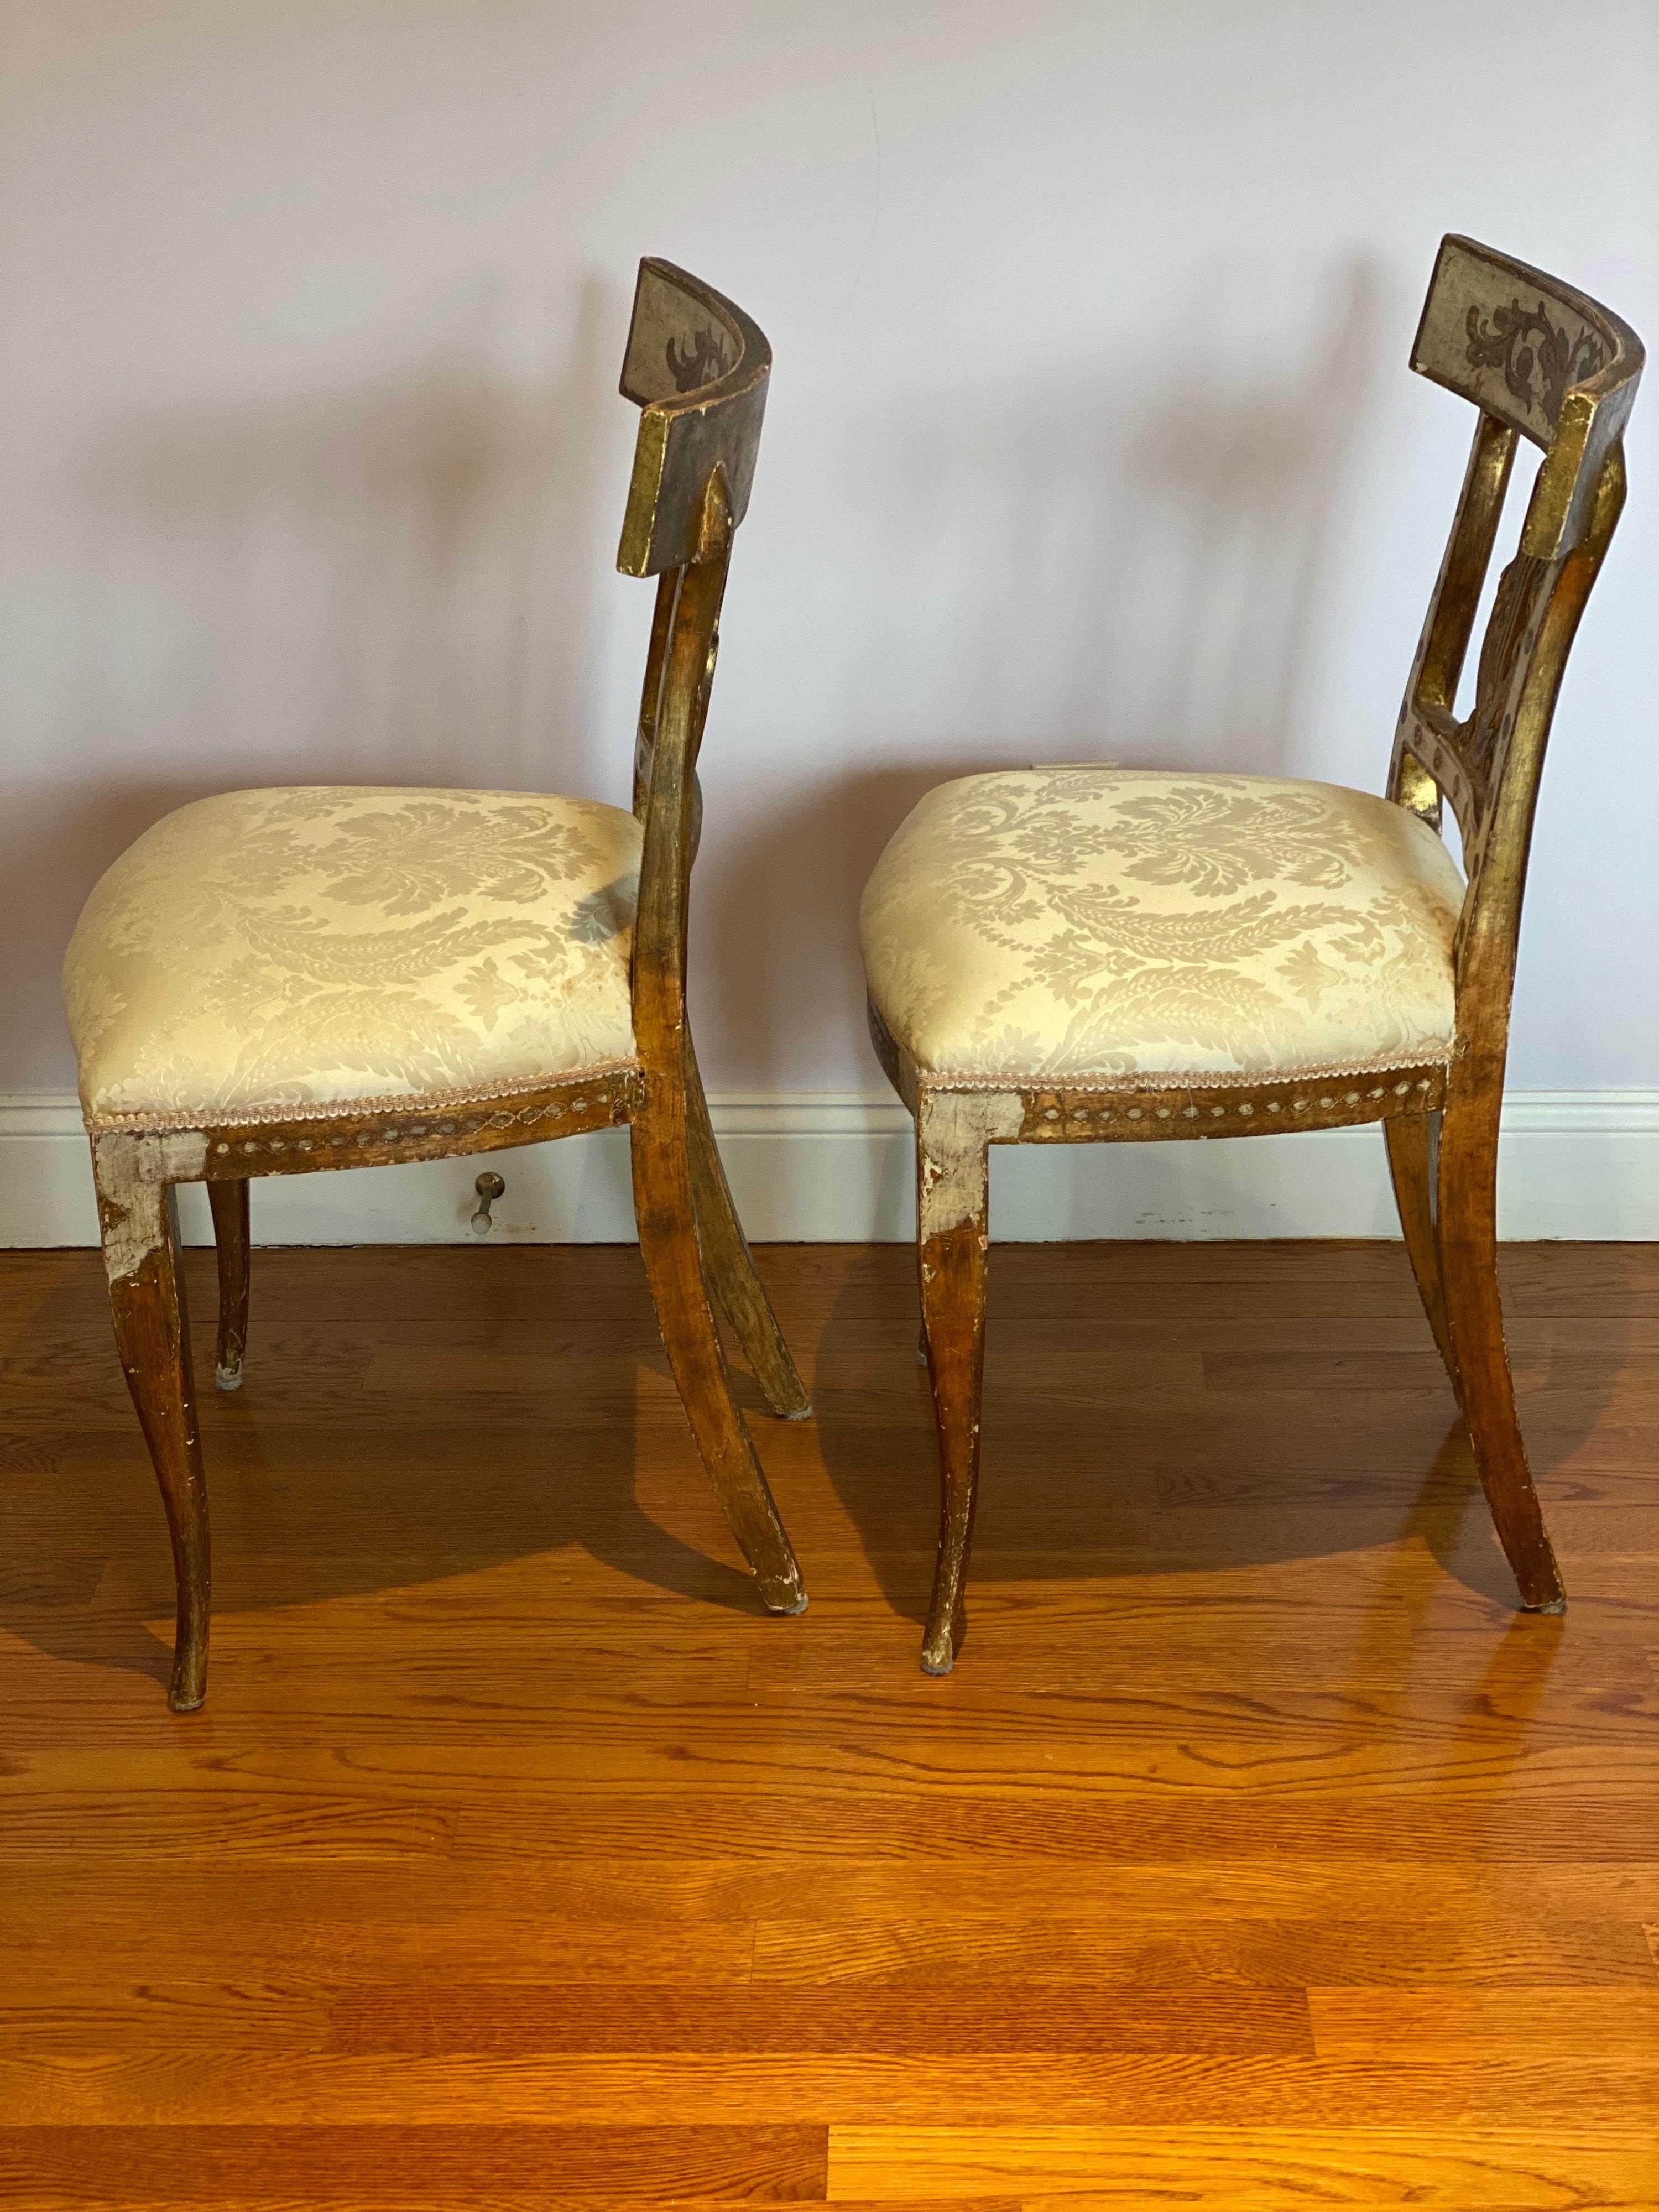 Pair of Italian Neoclassical Gilt-Wood Side Chairs with Swans and Lyres In Good Condition For Sale In Southampton, NY